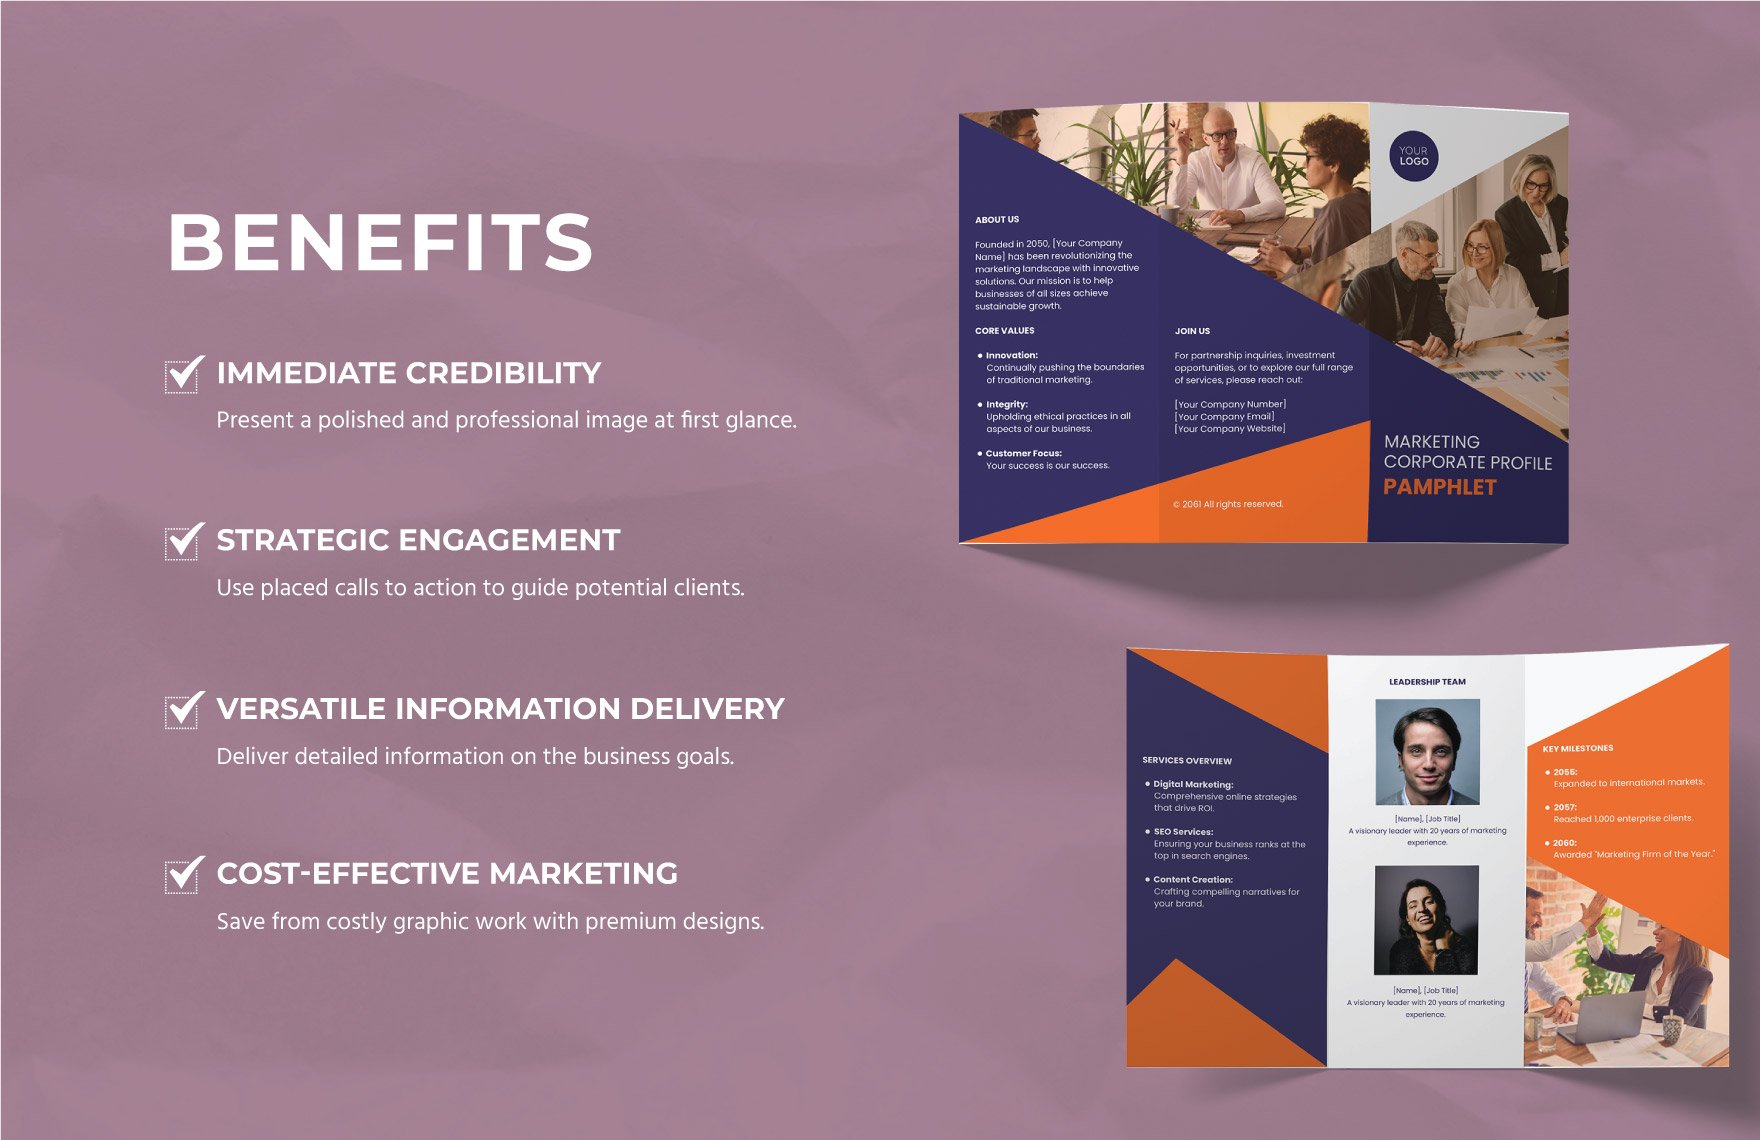 Marketing Corporate Profile Pamphlet Template